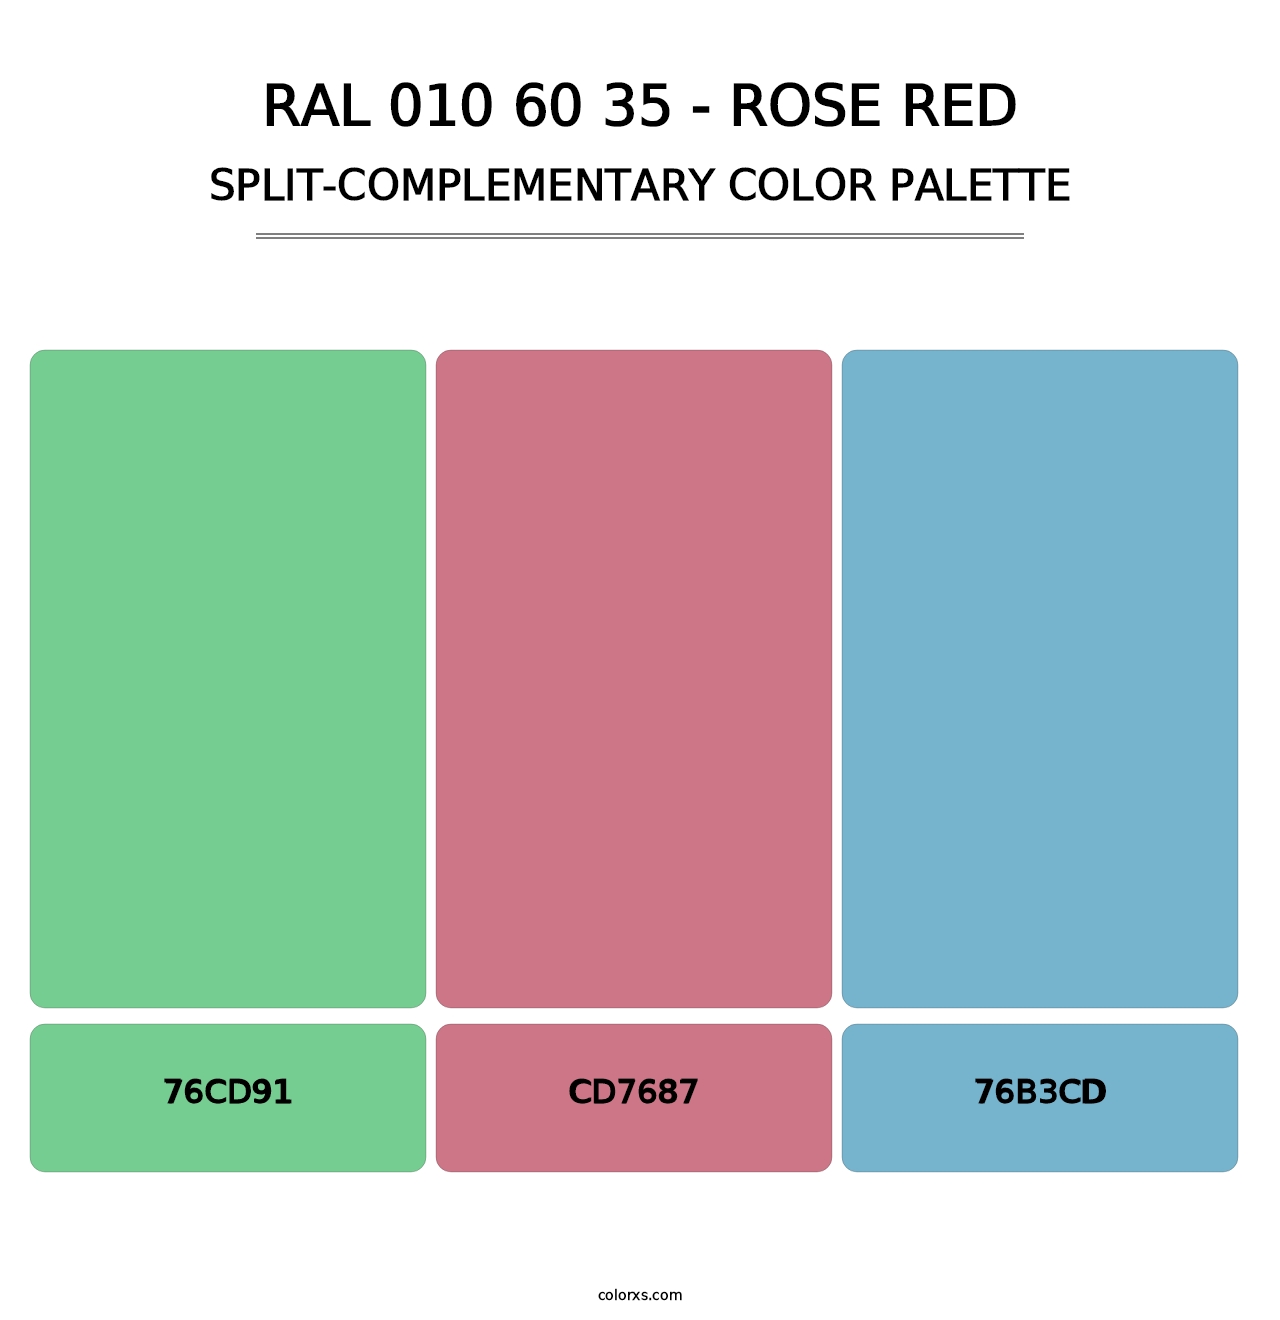 RAL 010 60 35 - Rose Red - Split-Complementary Color Palette